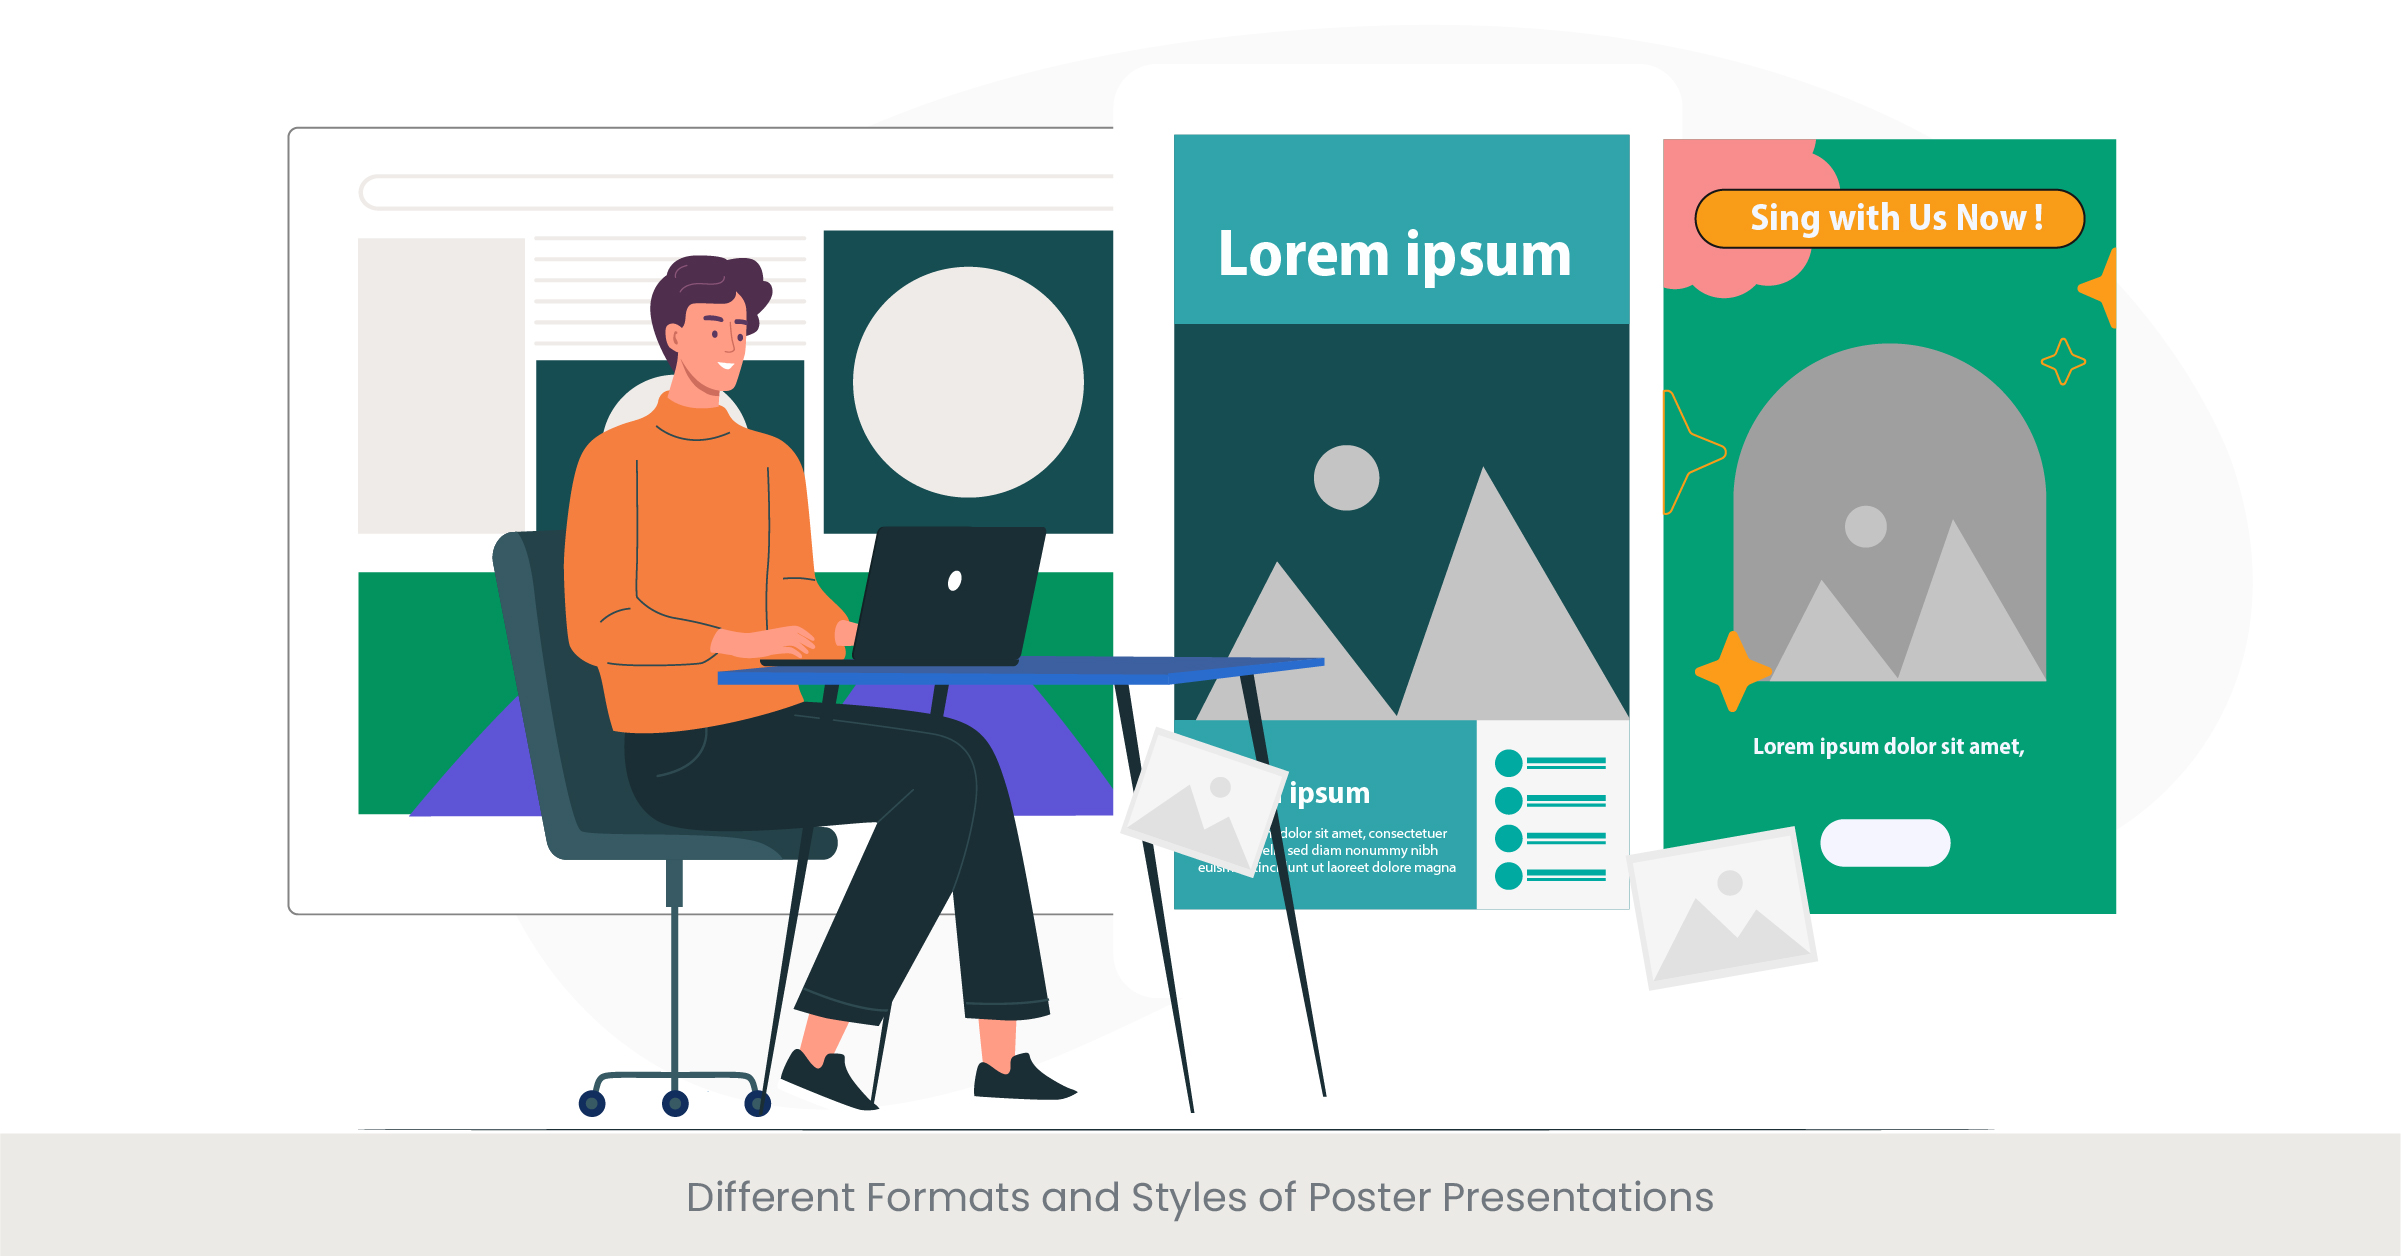 Different Formats and Styles of Poster Presentations